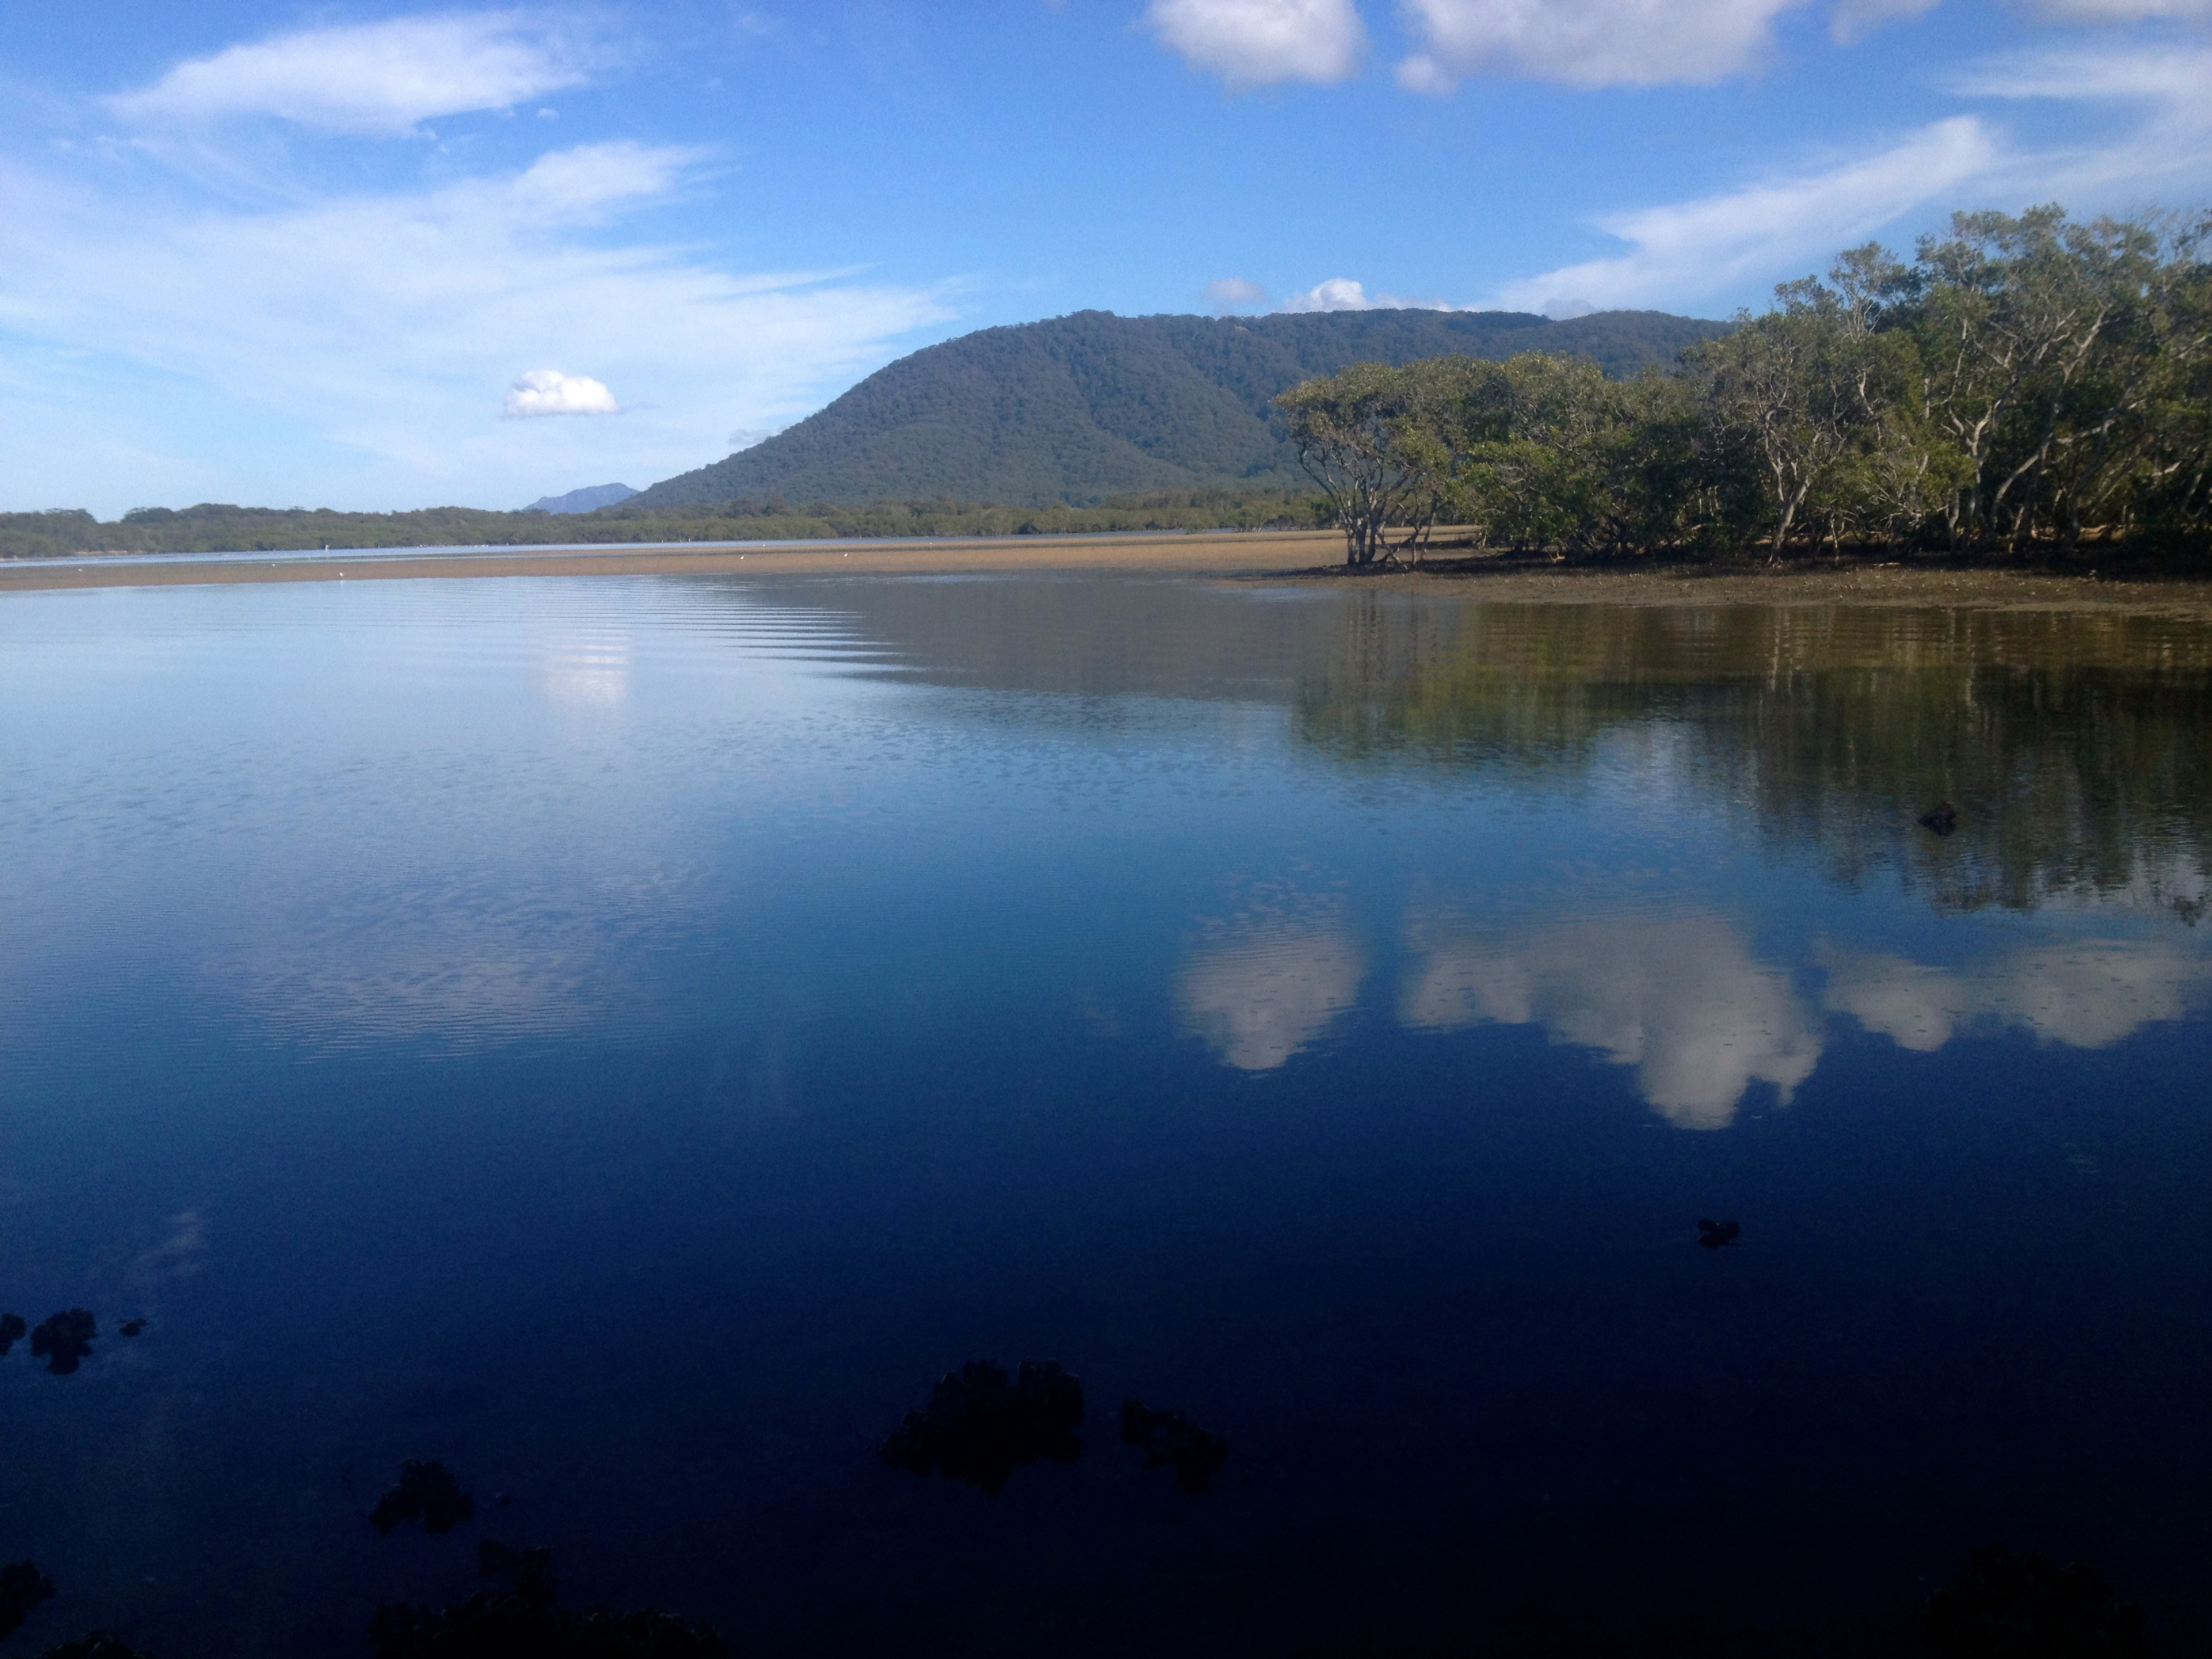 View of North Brother Mountain from Googley’s lagoon. Photo: Chay Khamsone.